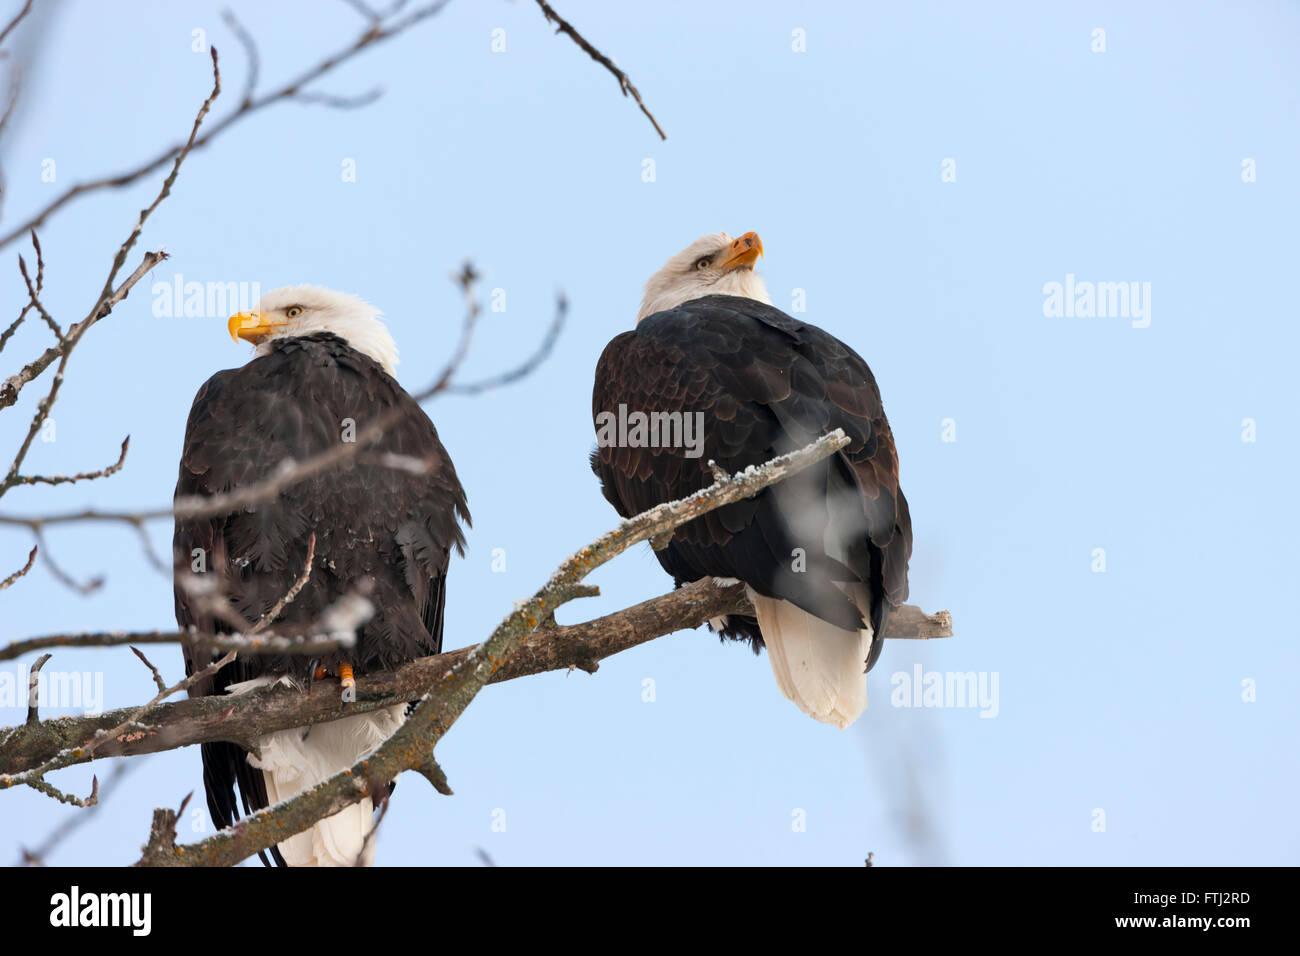 Two Bald Eagles on tree branch covered with snow, Alaska, USA Stock Photo